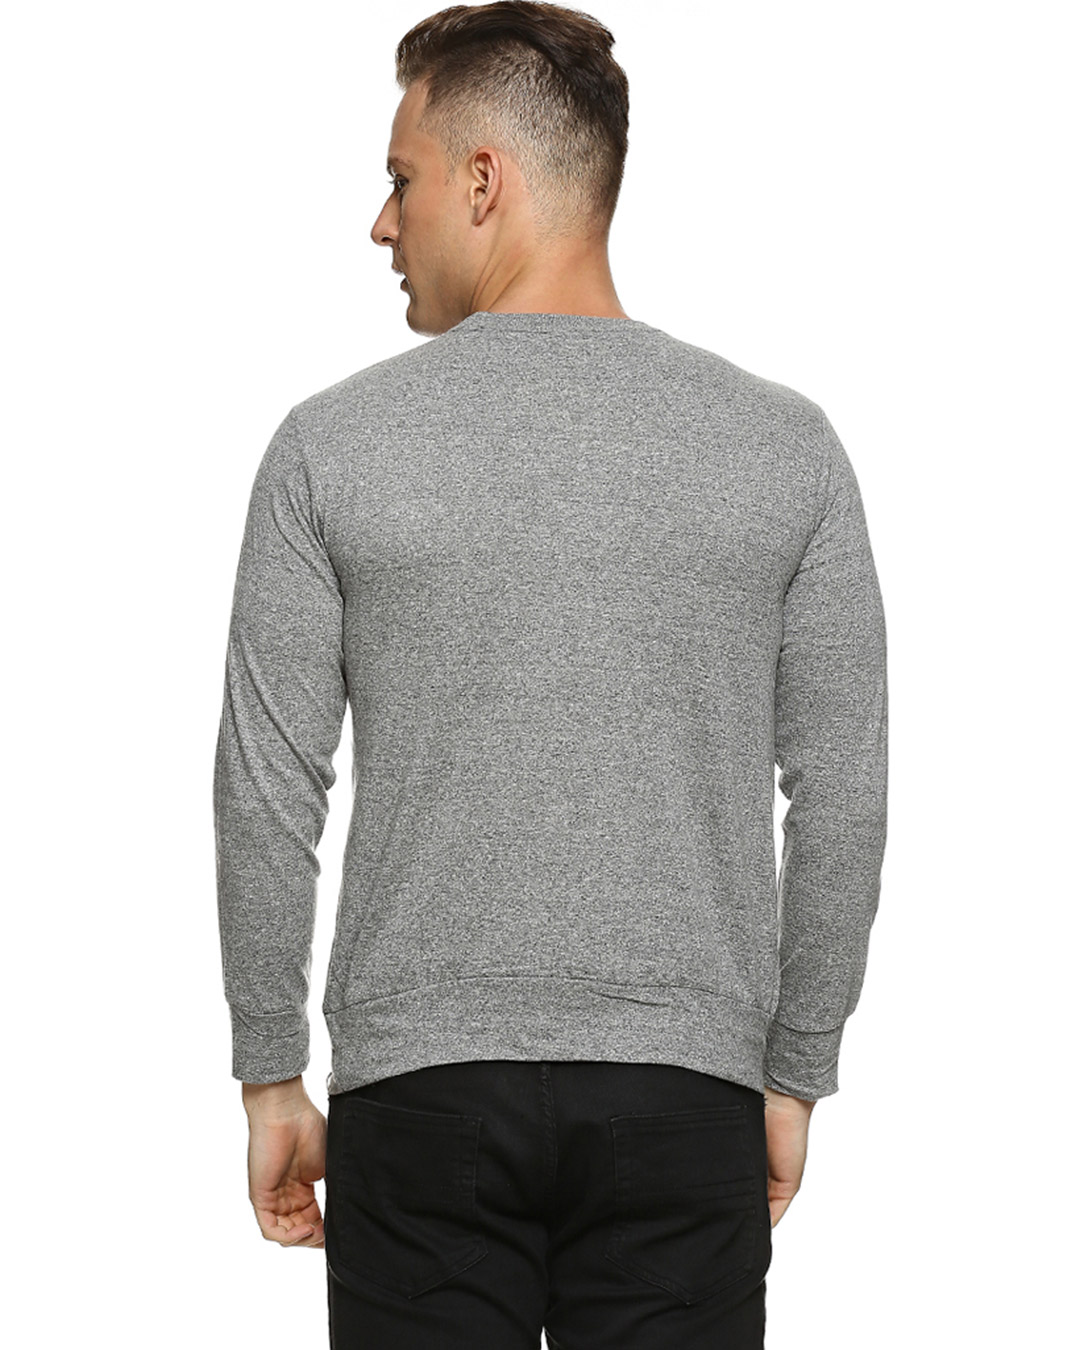 Shop Solid Men Round Or Crew Grey T Shirt-Back